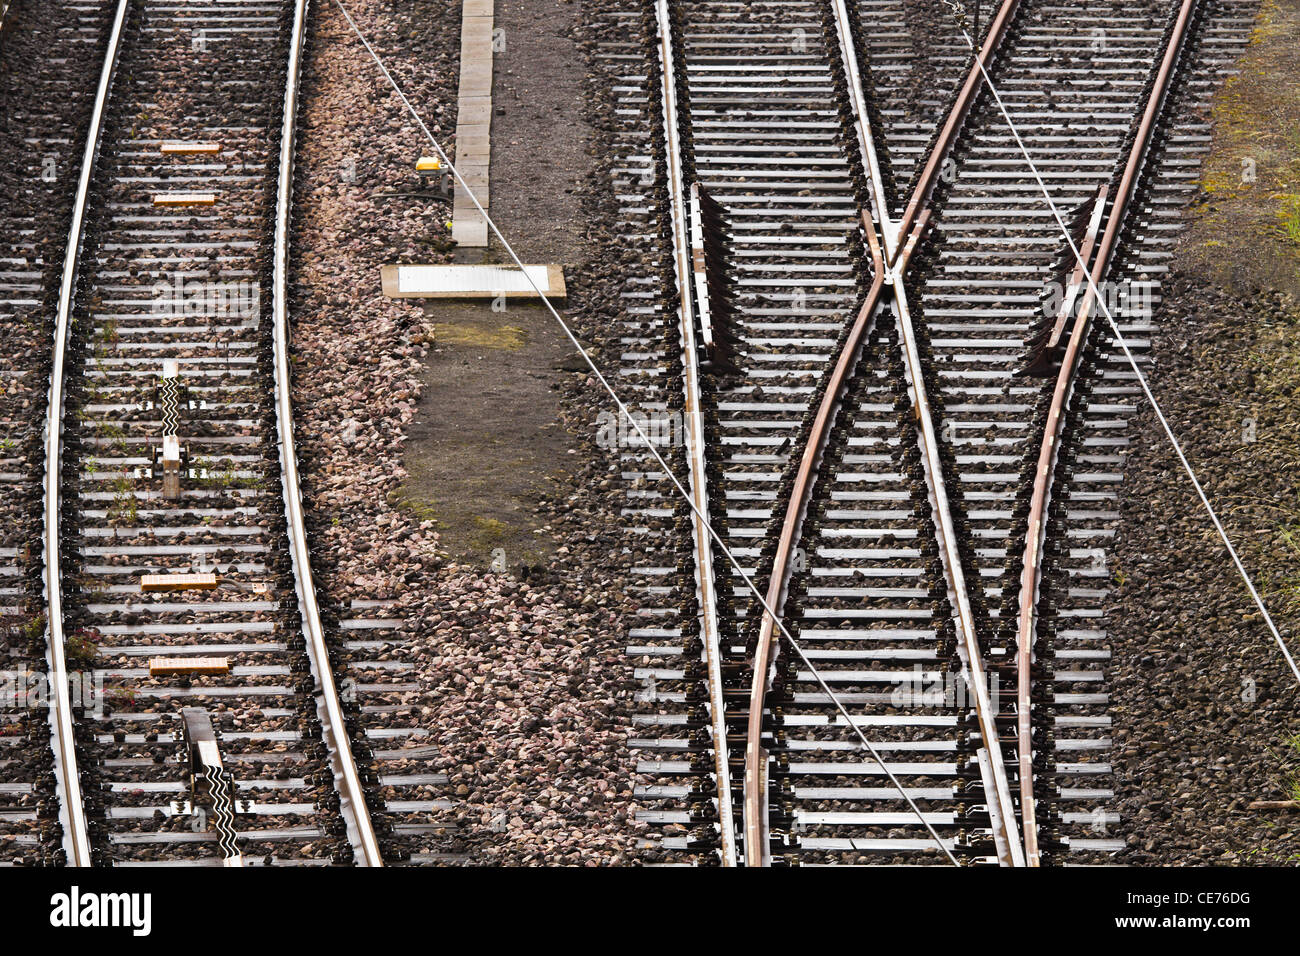 Railway line with switch - conceptual for making choices - horizontal image Stock Photo